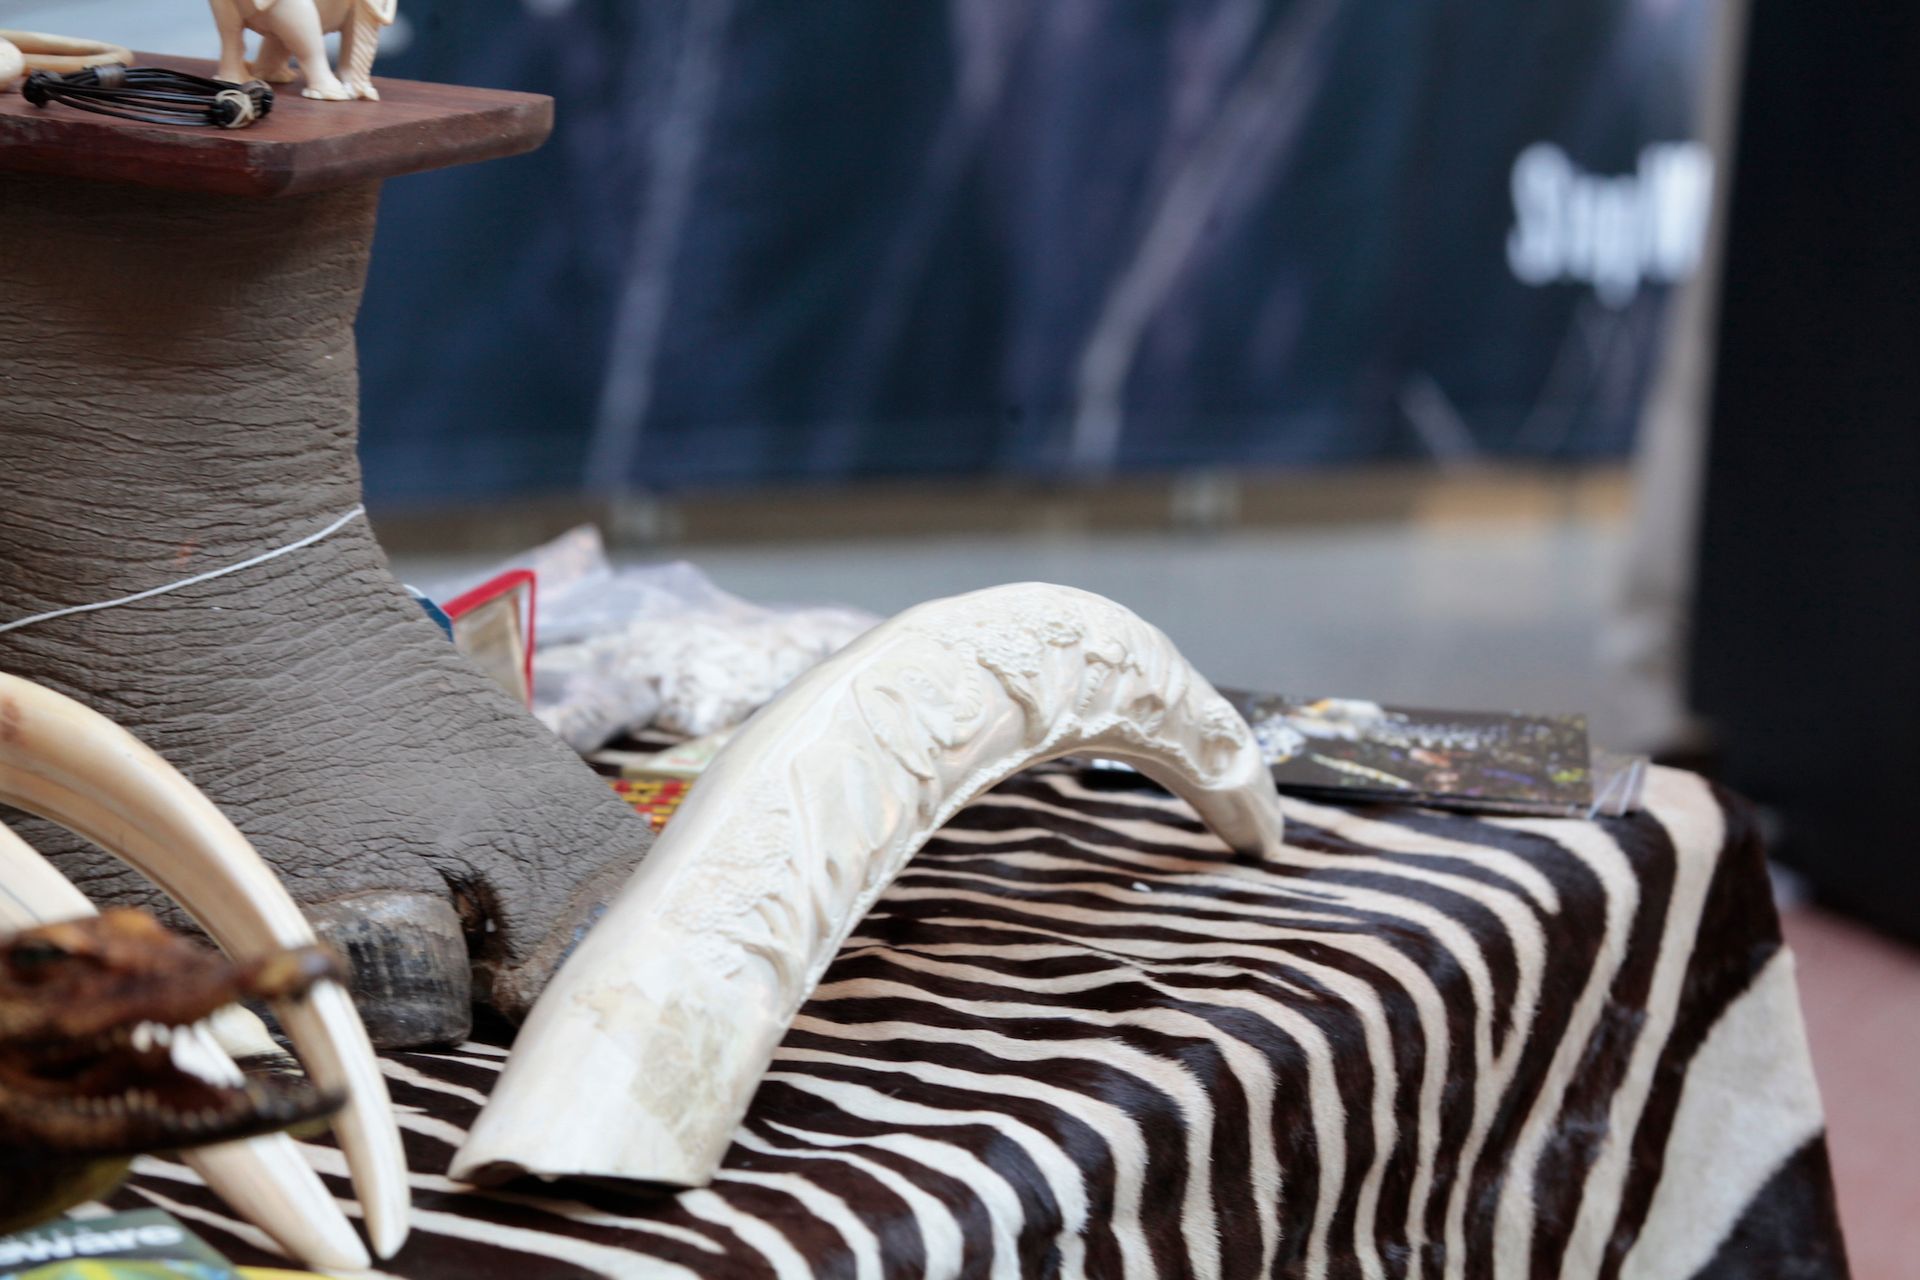 Confiscated illegal wildlife products, including a carved elephant tusk, on display at a US Fish and Wildlife Service event at Atlanta airport in 2016 US Fish and Wildlife Service Southeast Region, via Flickr